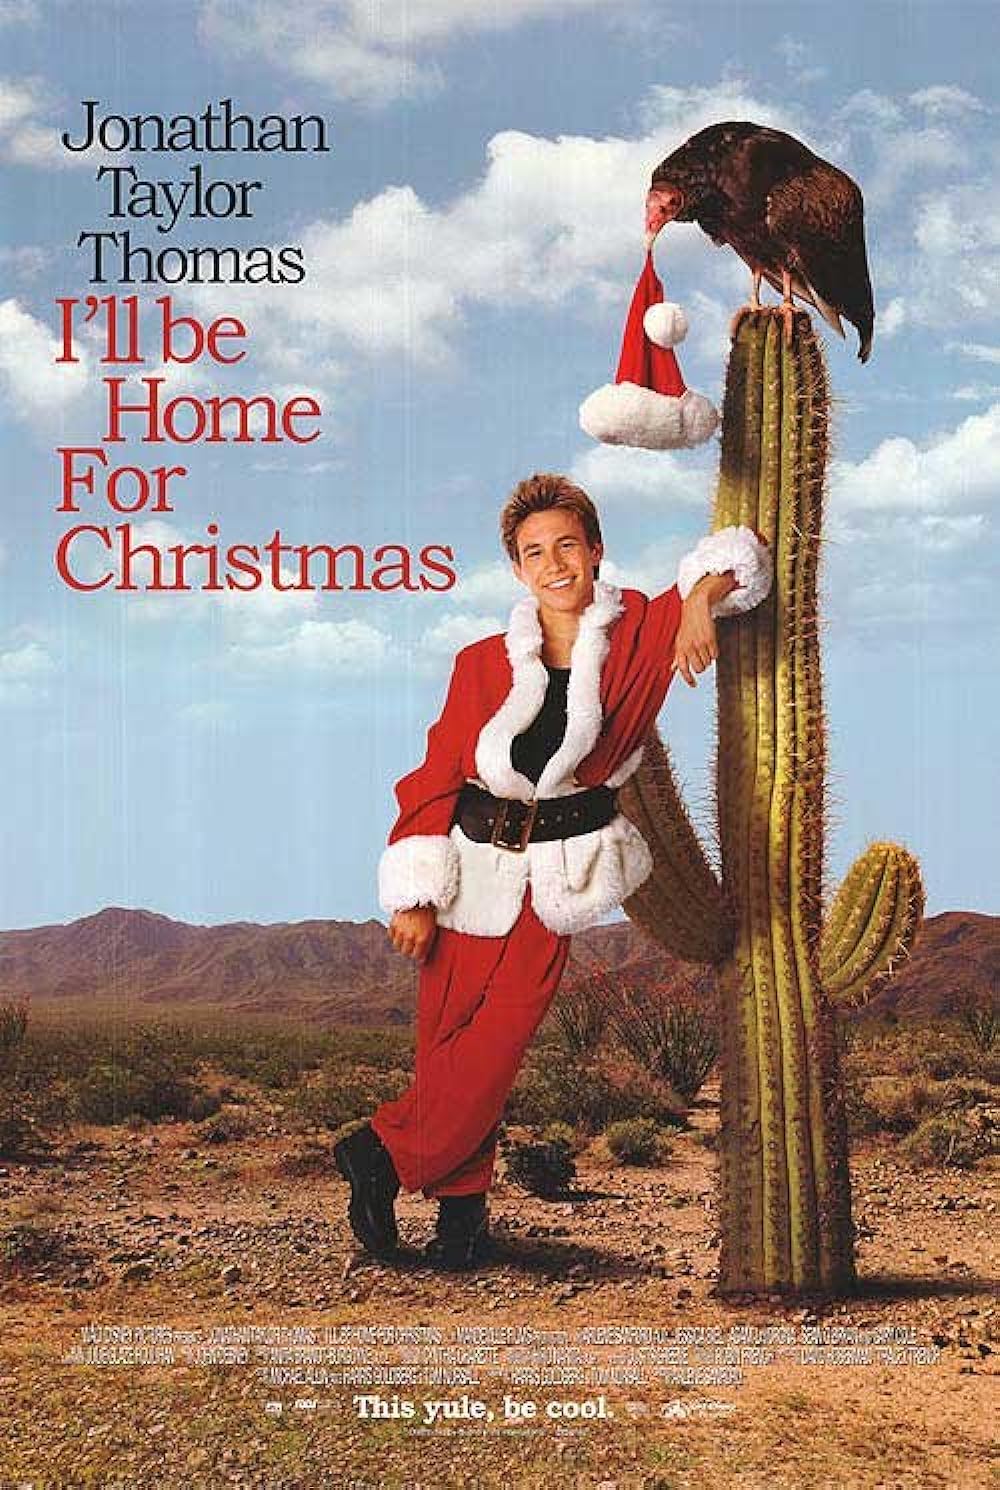 I'll Be Home for Christmas: A '90s tale starring Jonathan Taylor Thomas as a boarding school teen aiming to get home for a promised Porsche at Christmas dinner. It's a wacky road trip filled with life lessons.